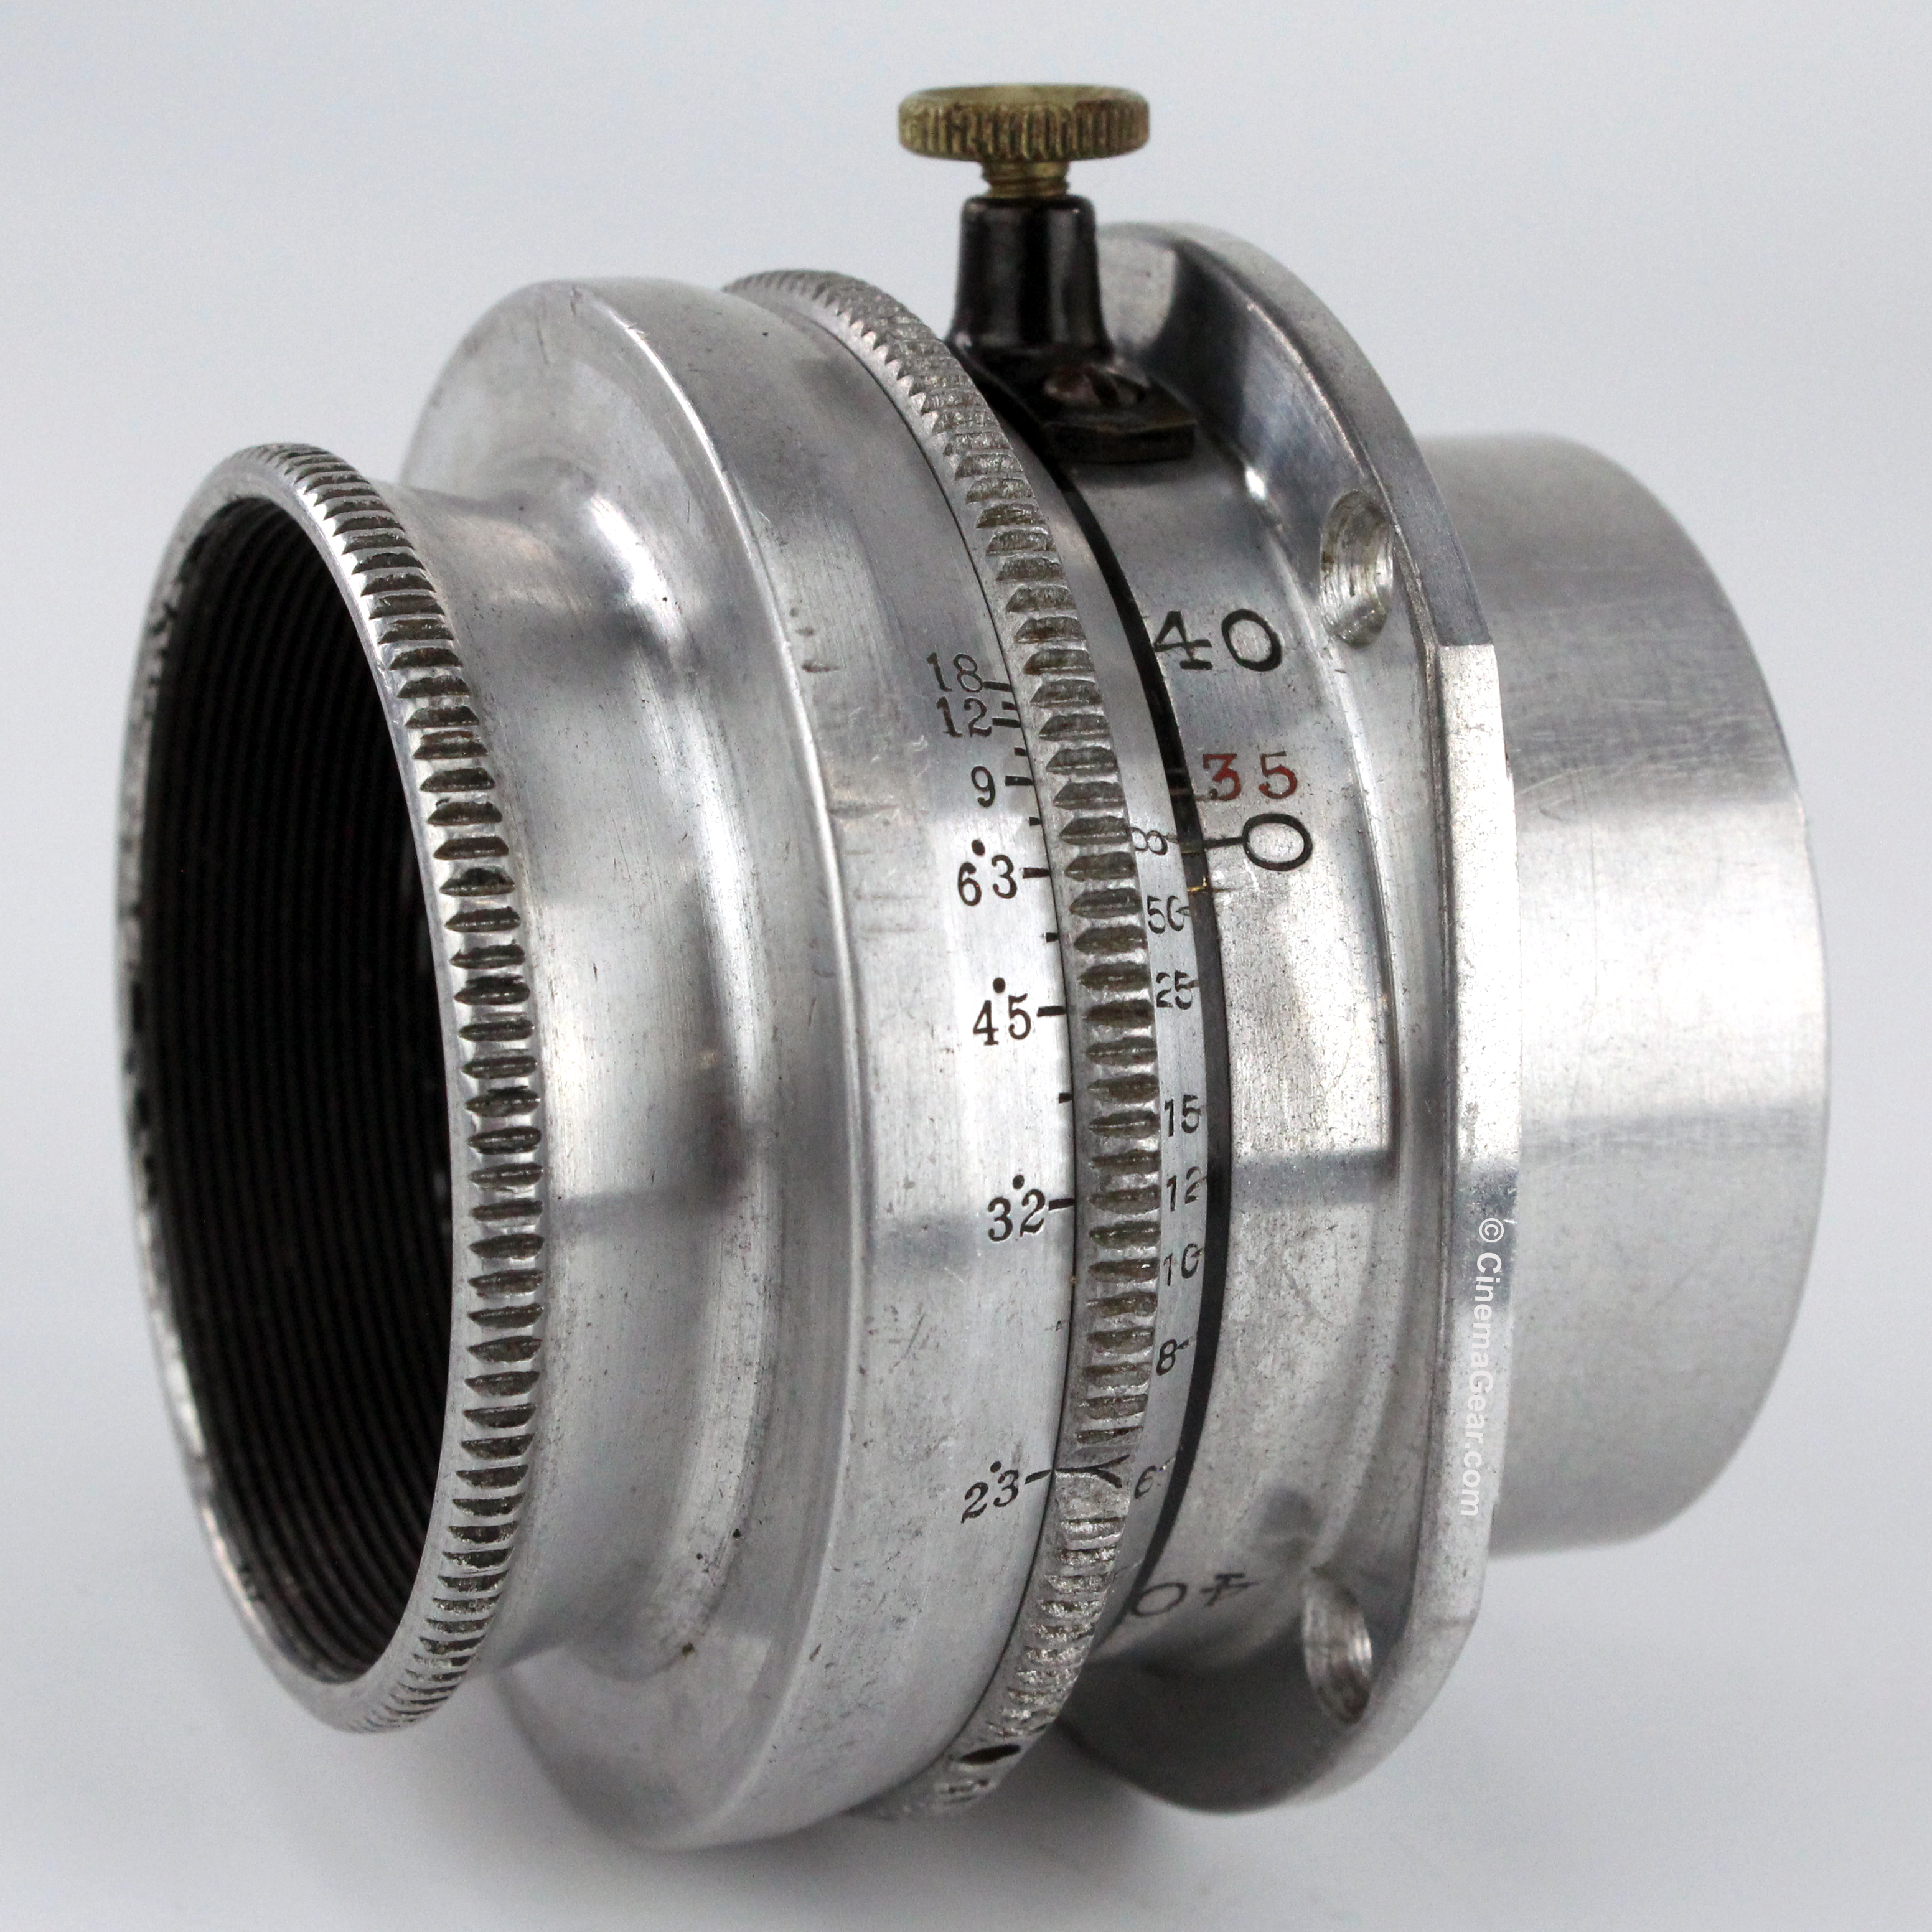 Cooke Speed Panchro 40mm f2 lens in Mitchell Standard mount.